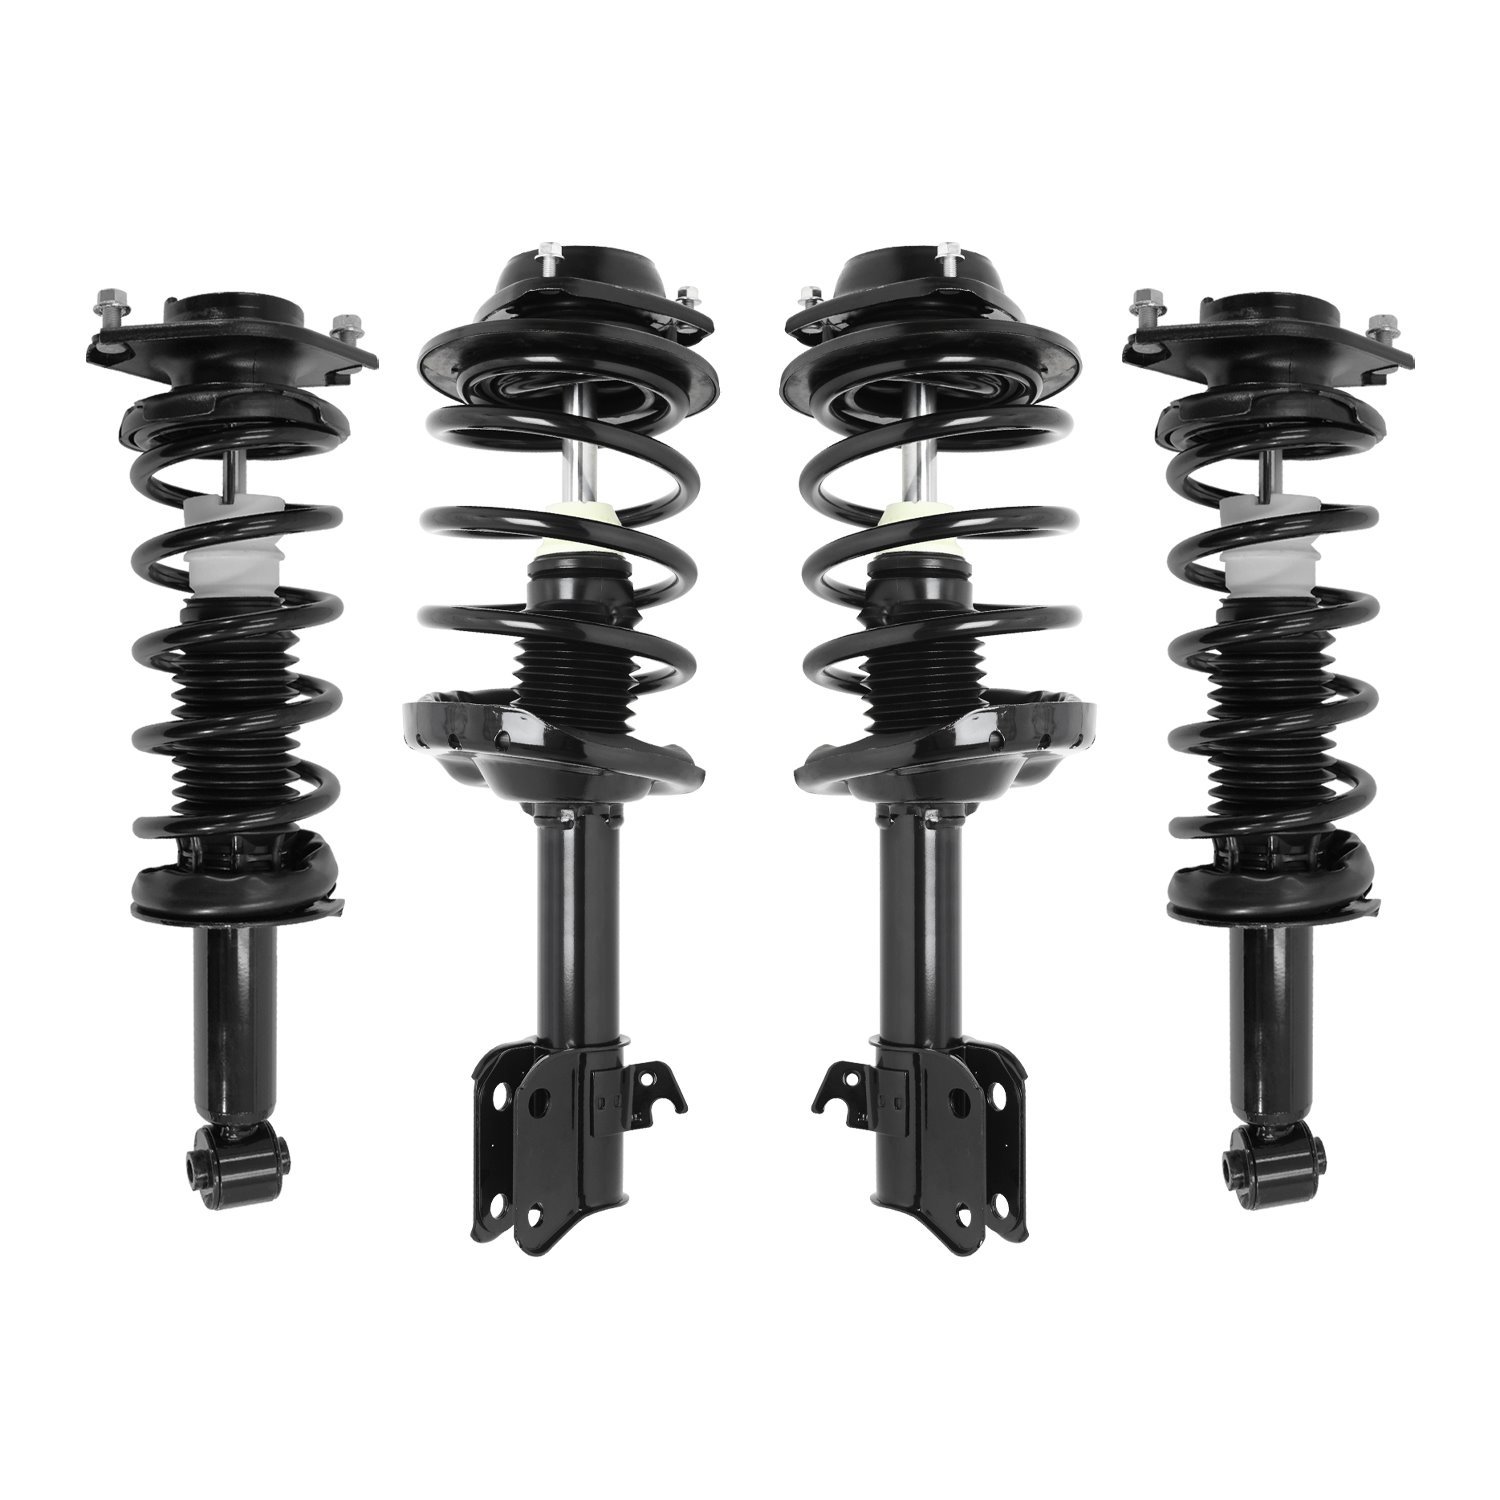 4-11913-15990-001 Front & Rear Suspension Strut & Coil Spring Assembly Kit Fits Select Subaru Legacy